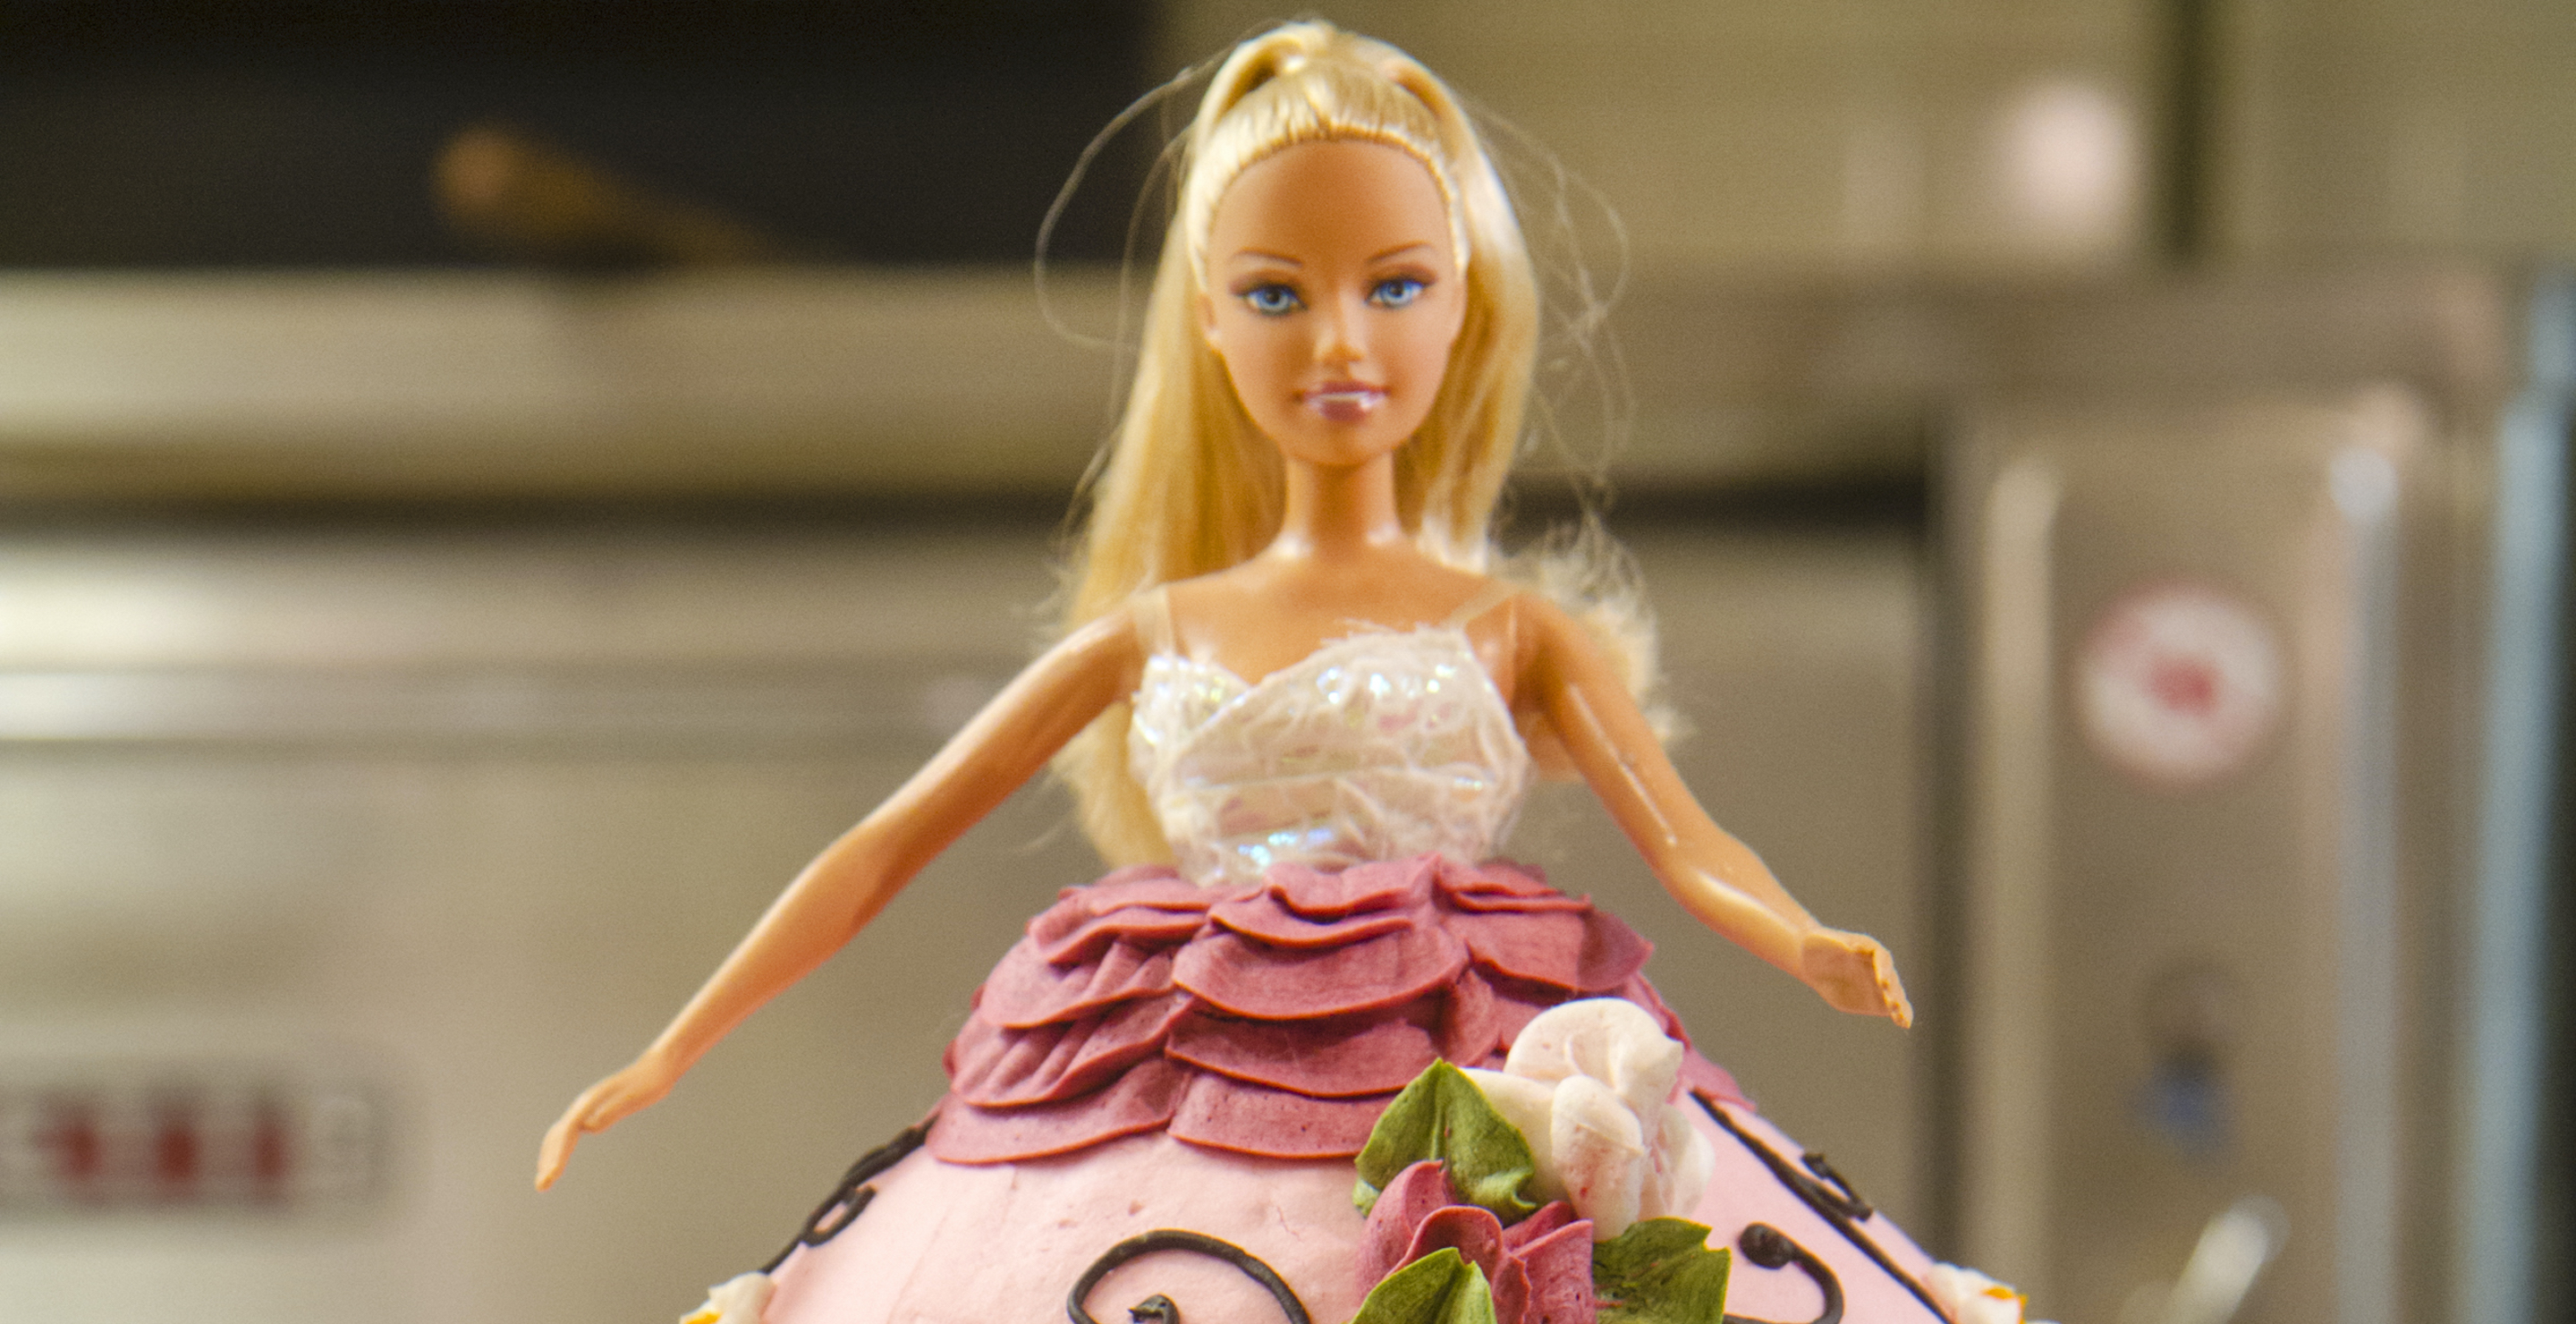 A Barbie cake for sale in Jerry's Foods.